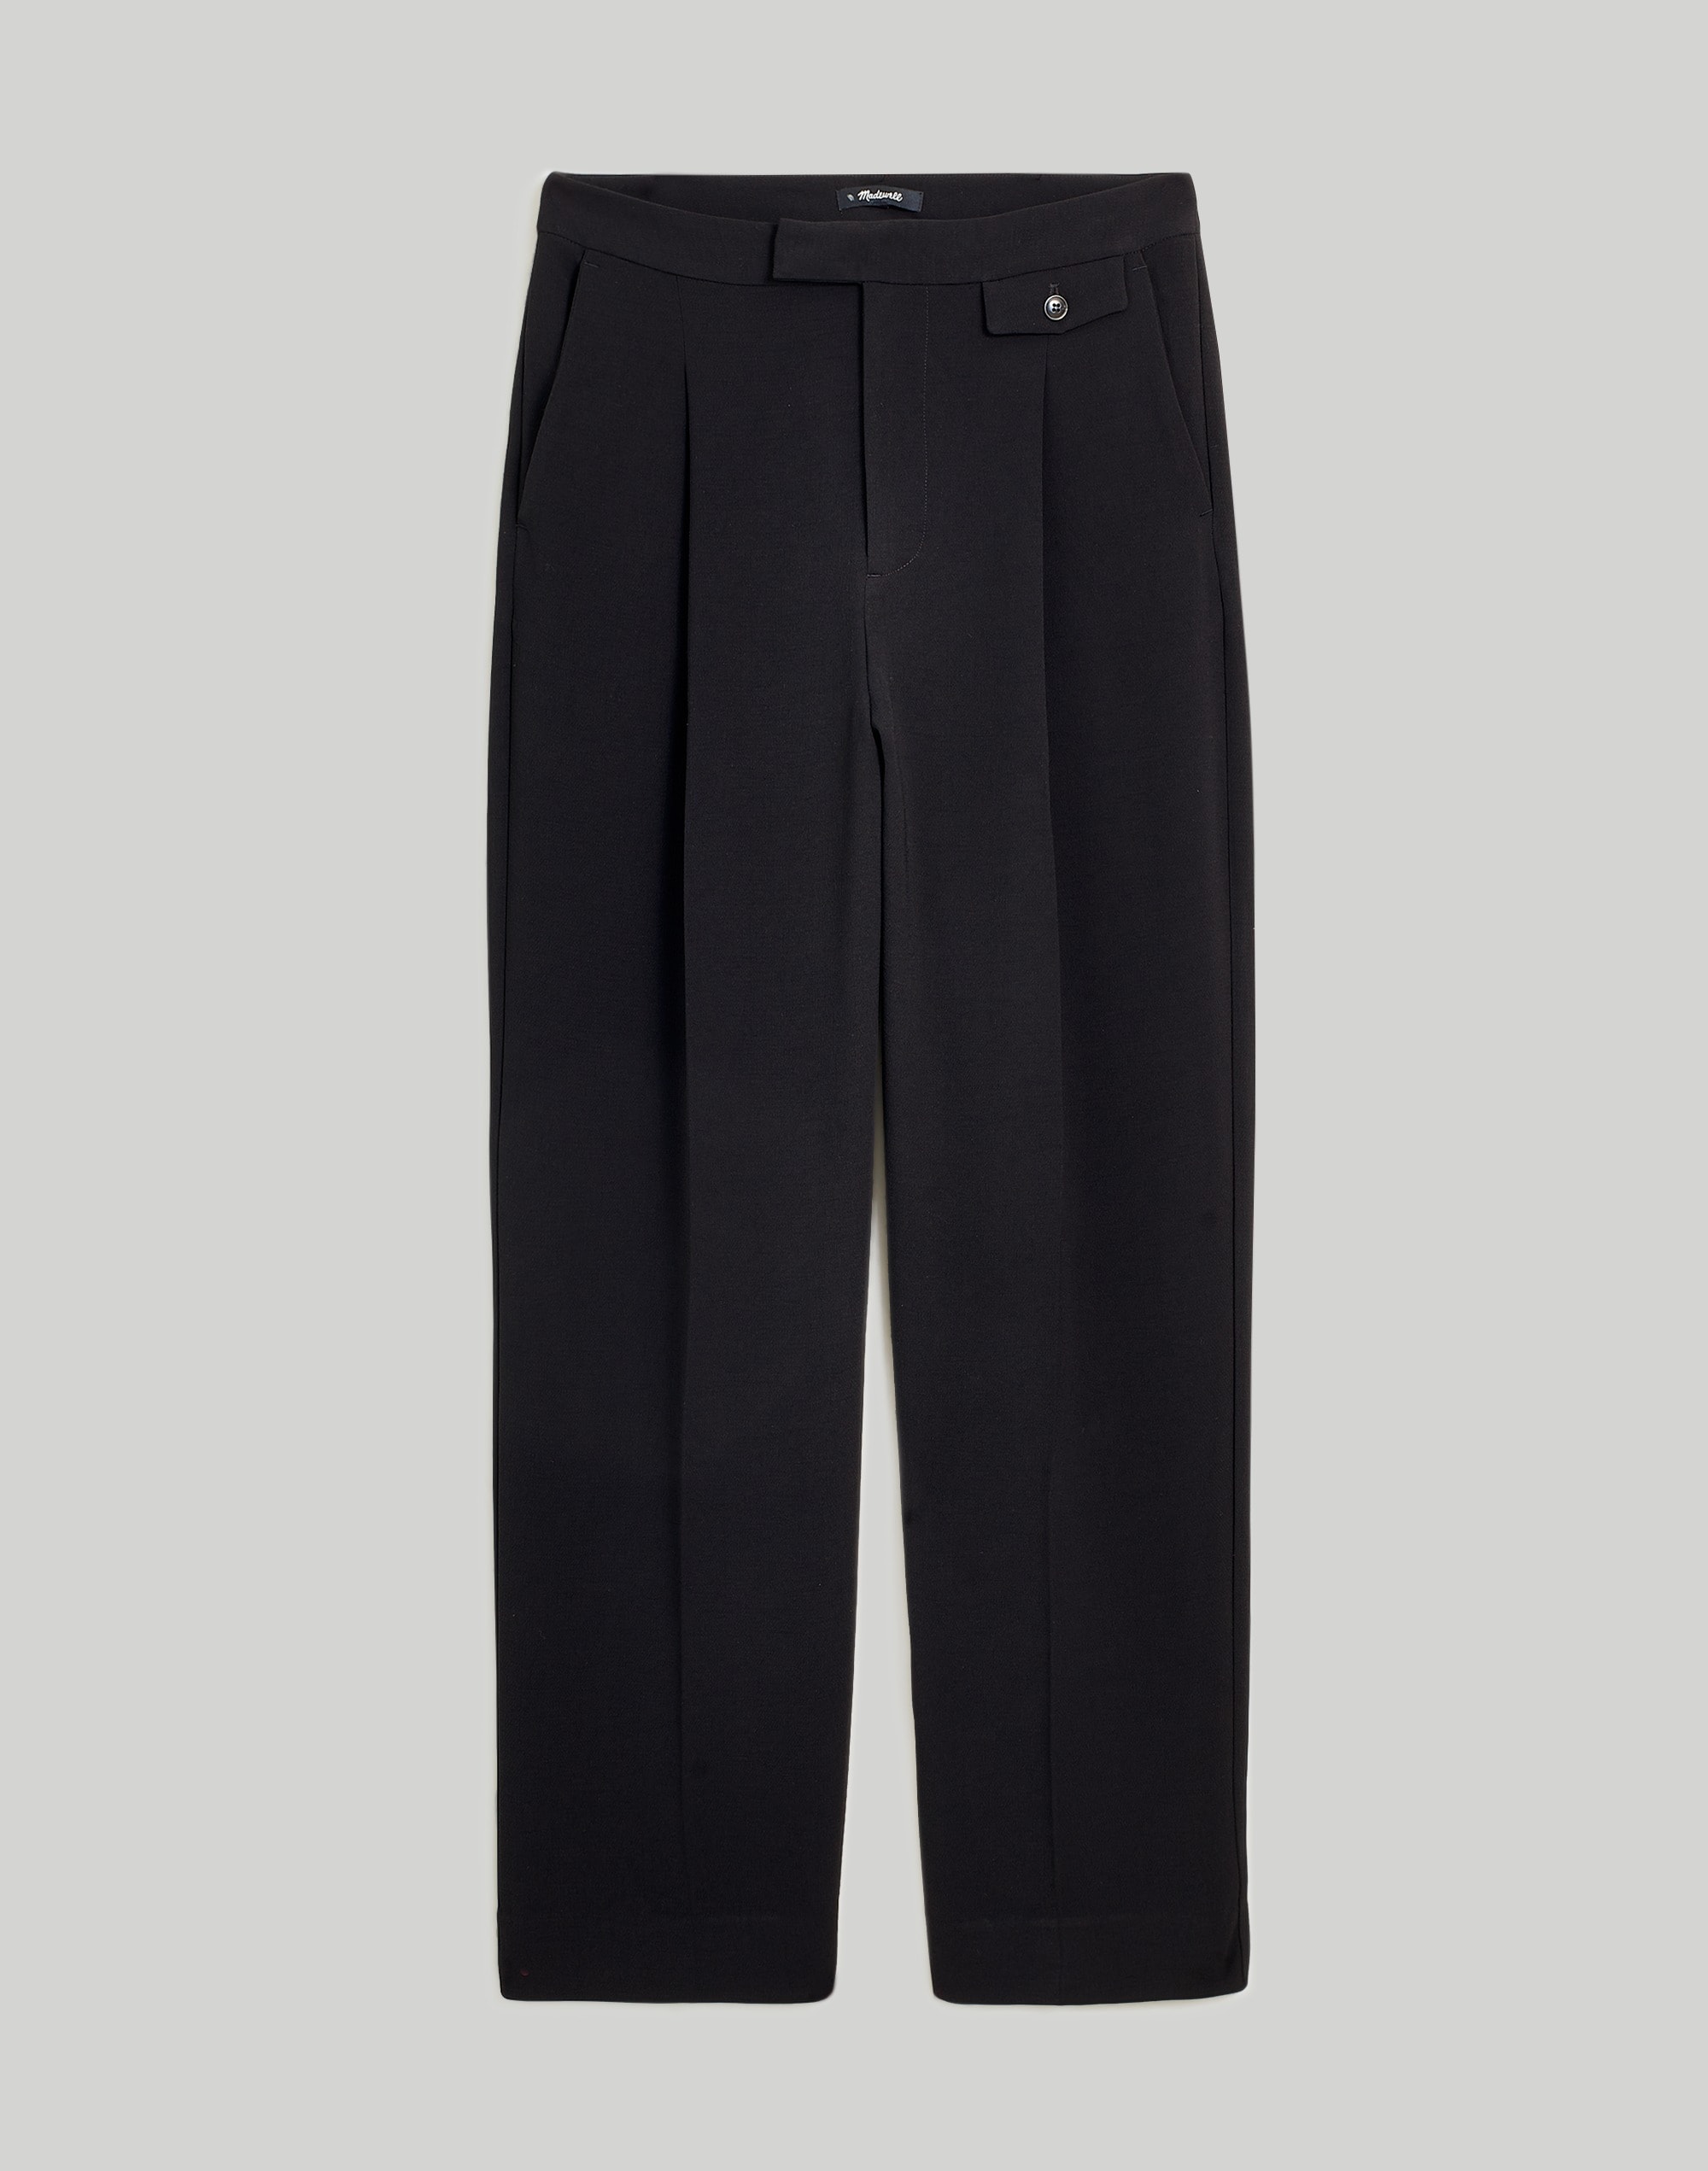 The Plus Rosedale High-Rise Straight Pant in Crepe